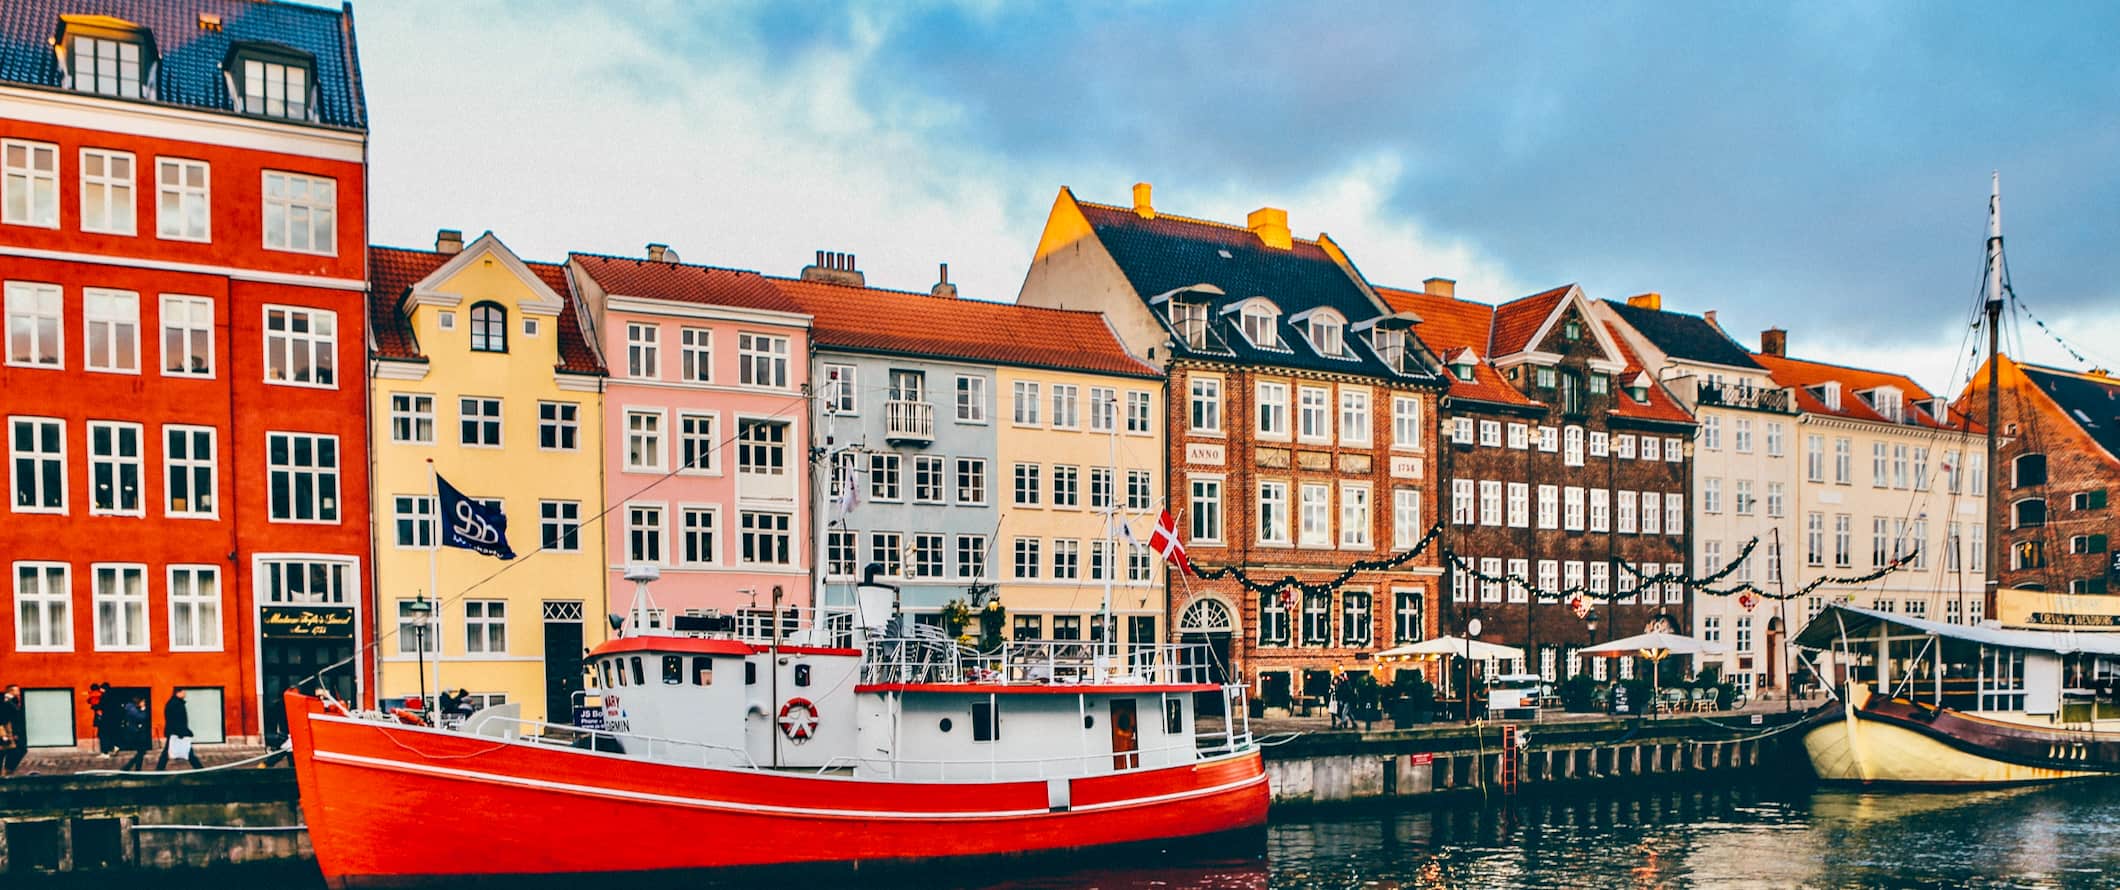 More colorful buildings along a canal lined with boats in Copenhagen, Denmark